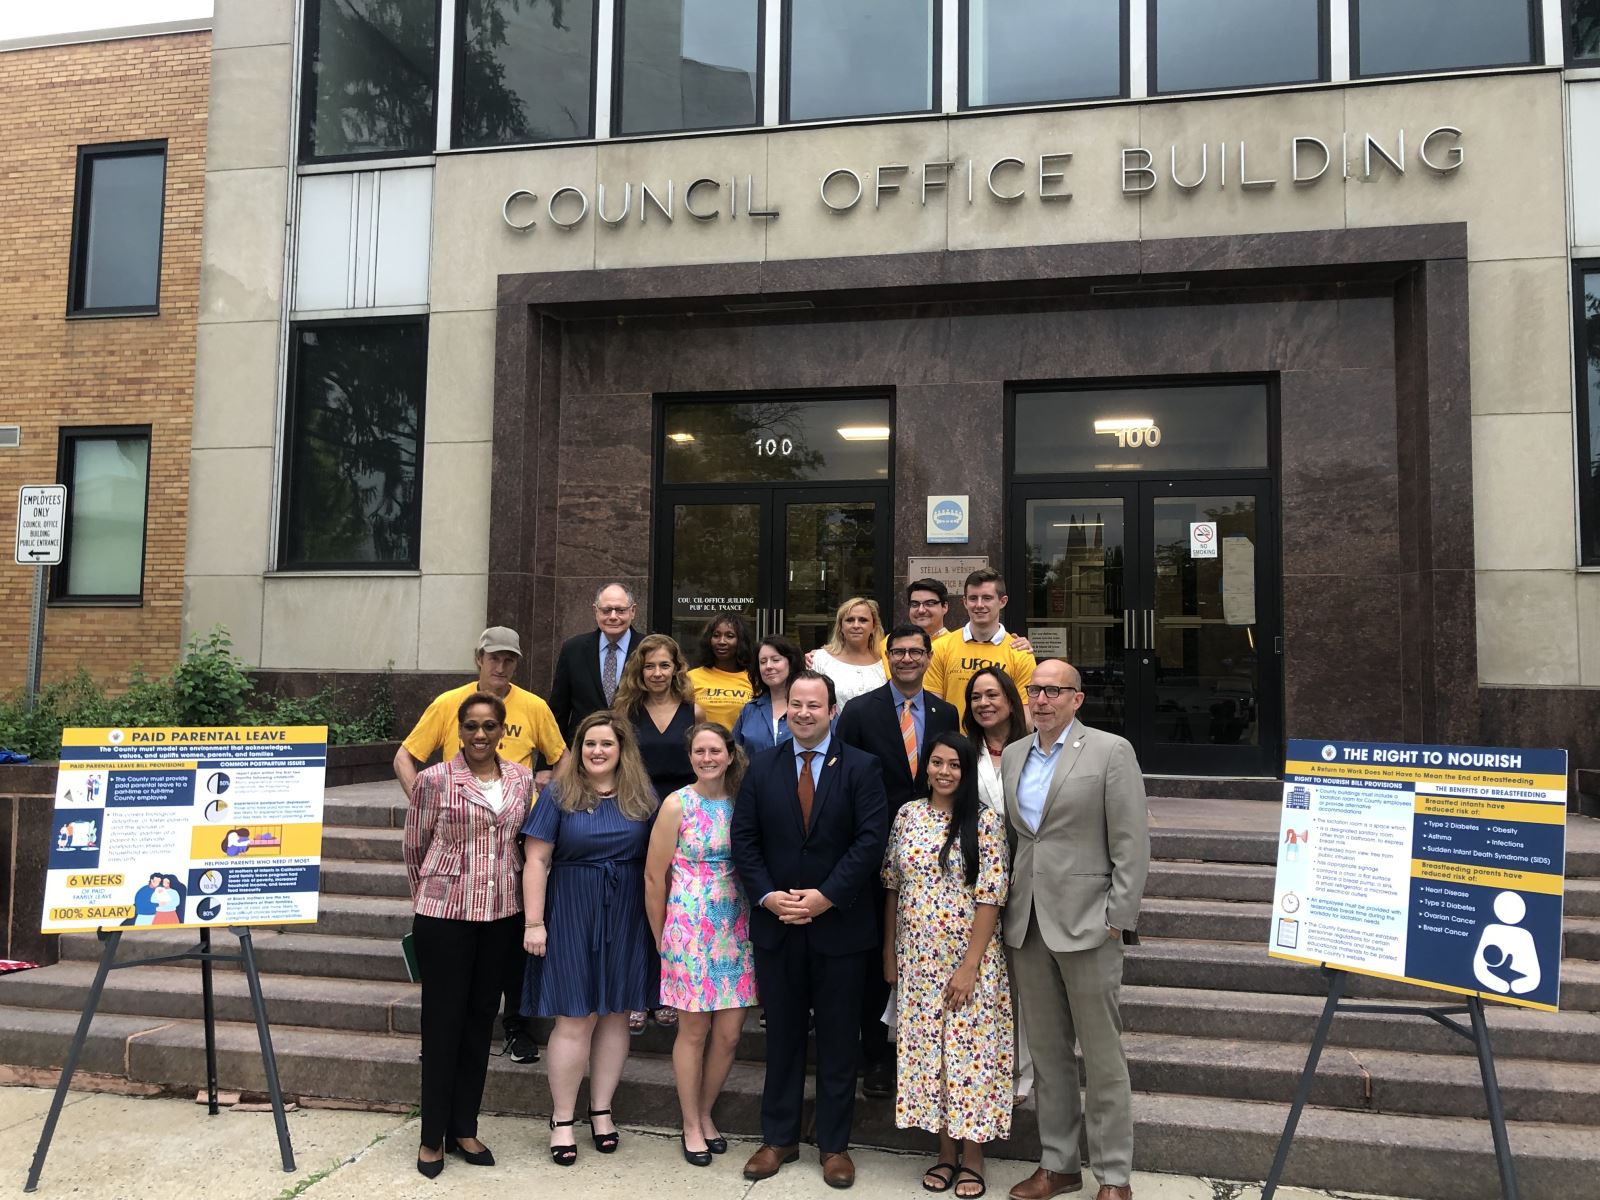 Councilmember Andrew Friedson stands with colleagues and supporters in front of the County Council Building in Rockville after a press conference presenting the two new bills.